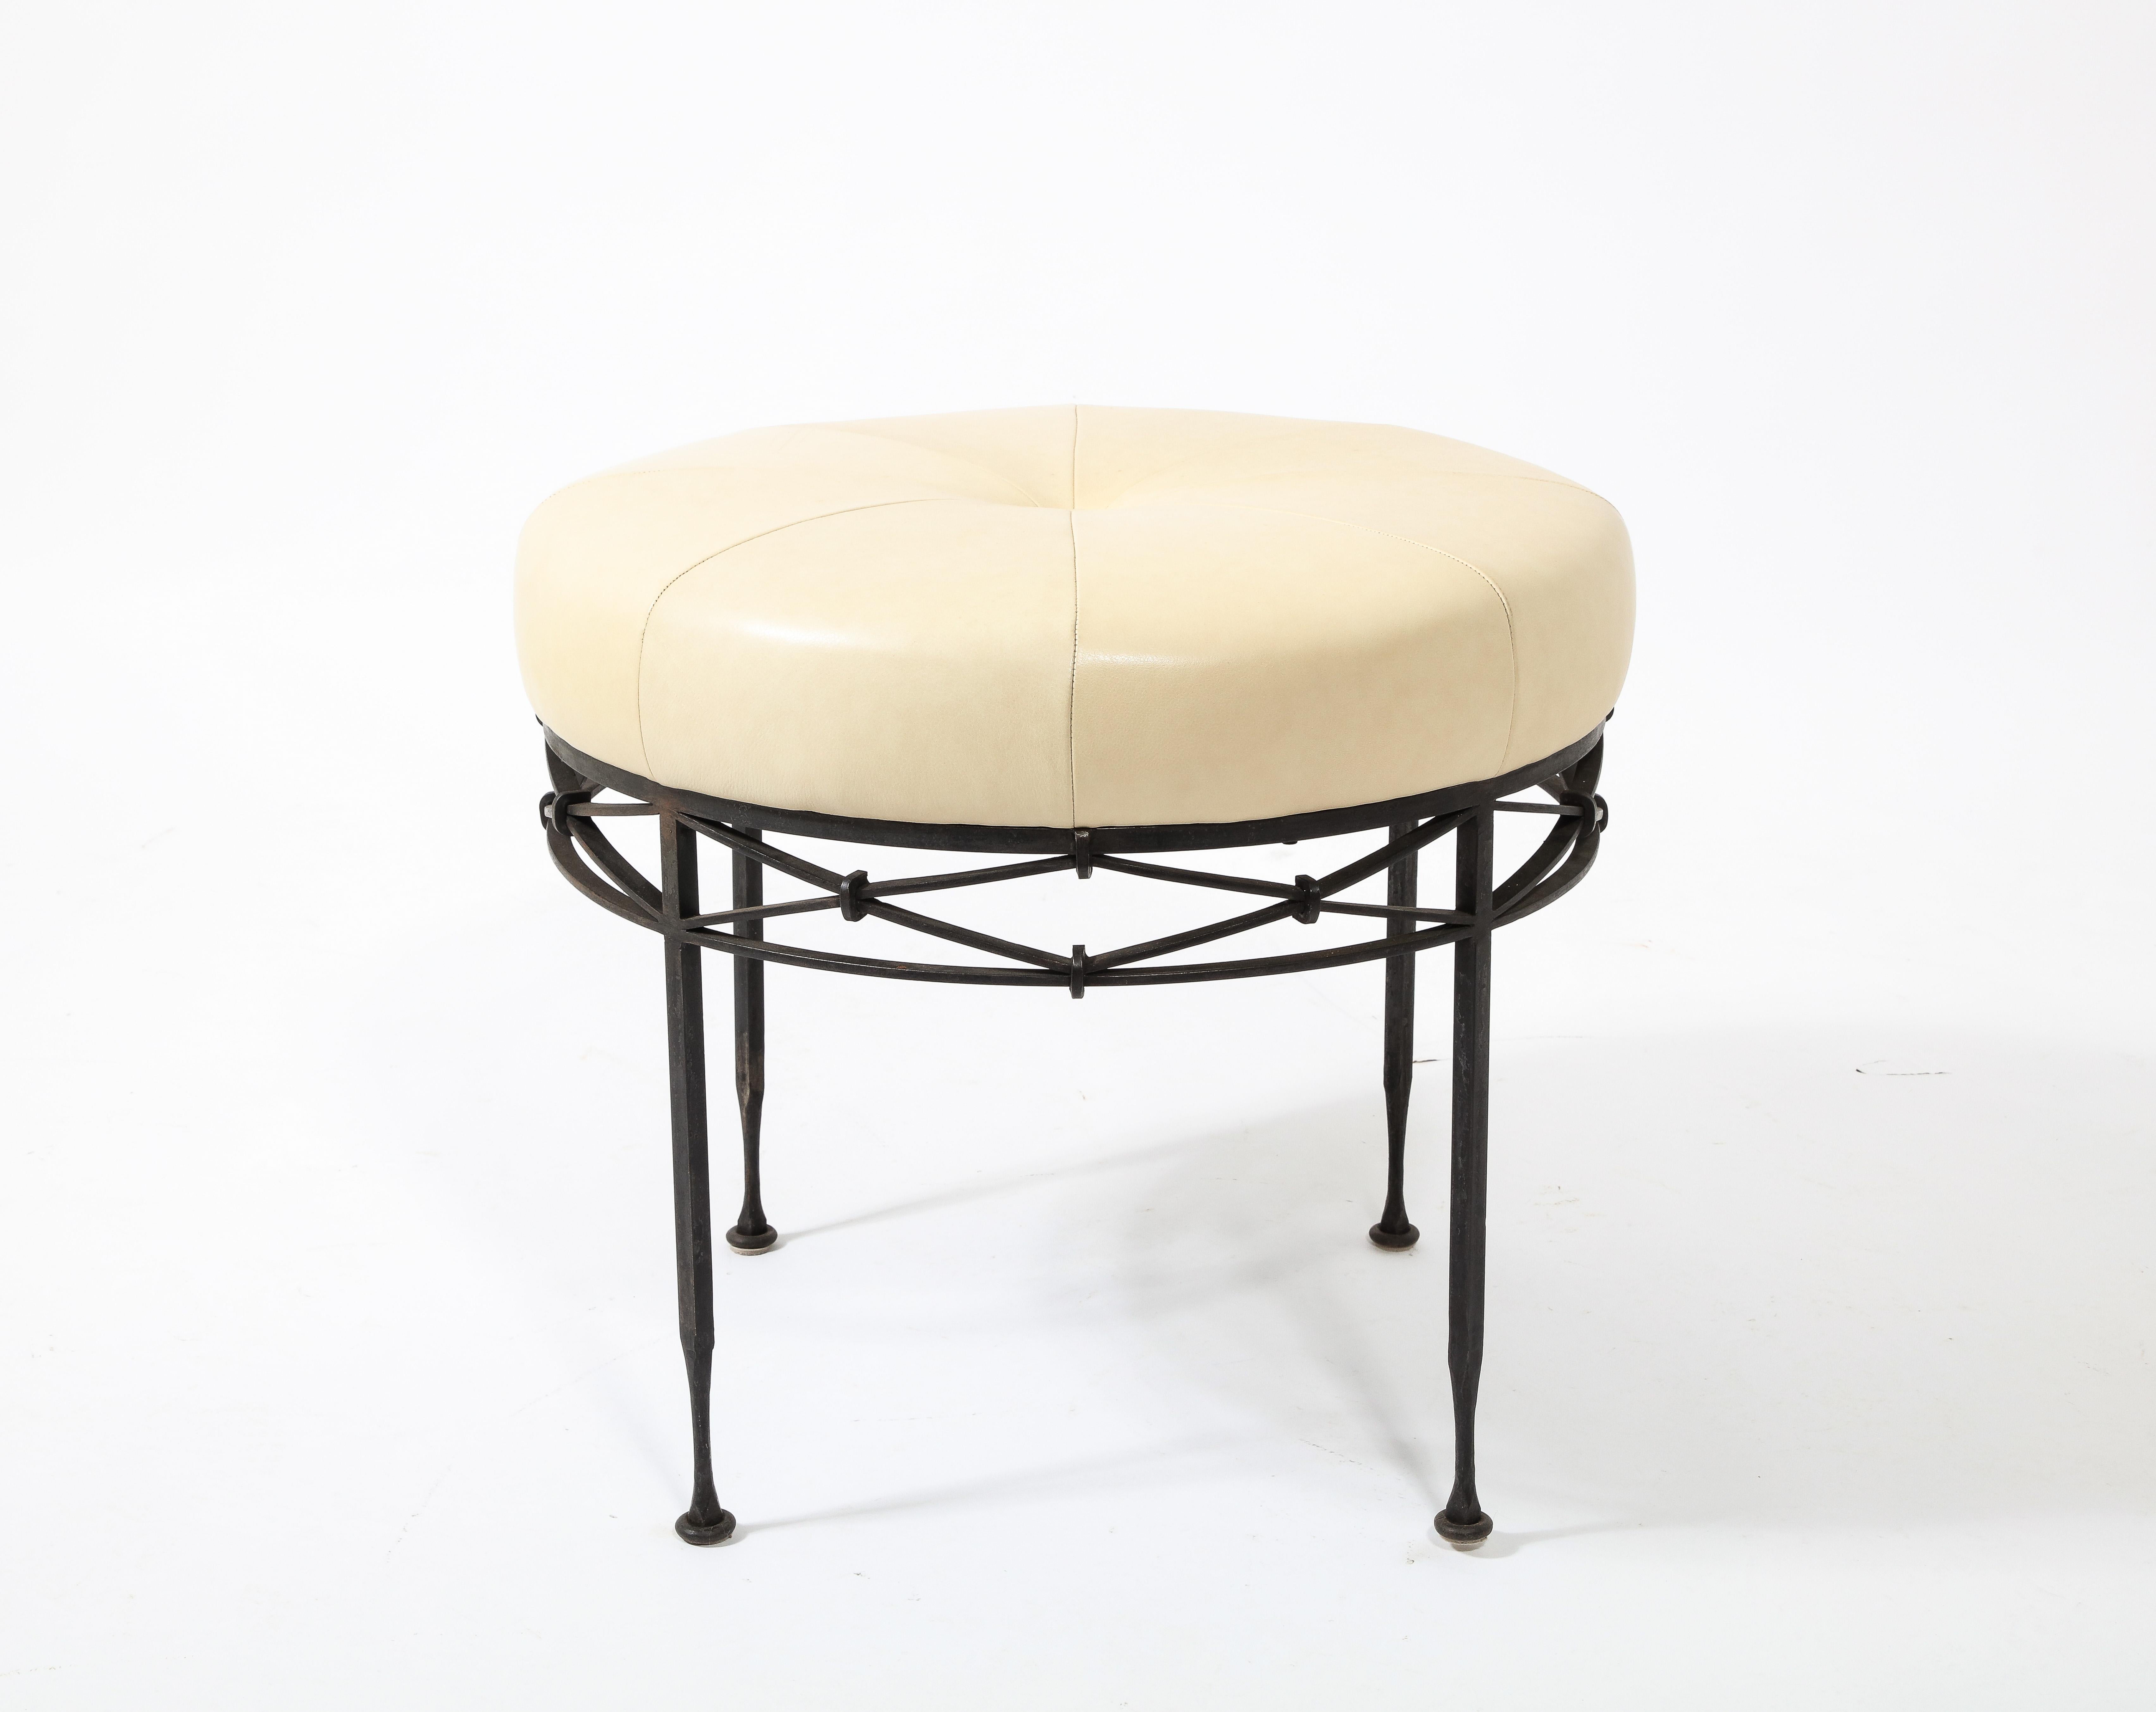 Wrought iron stool with a drum strapping design on the circumference, upholstered in leather.